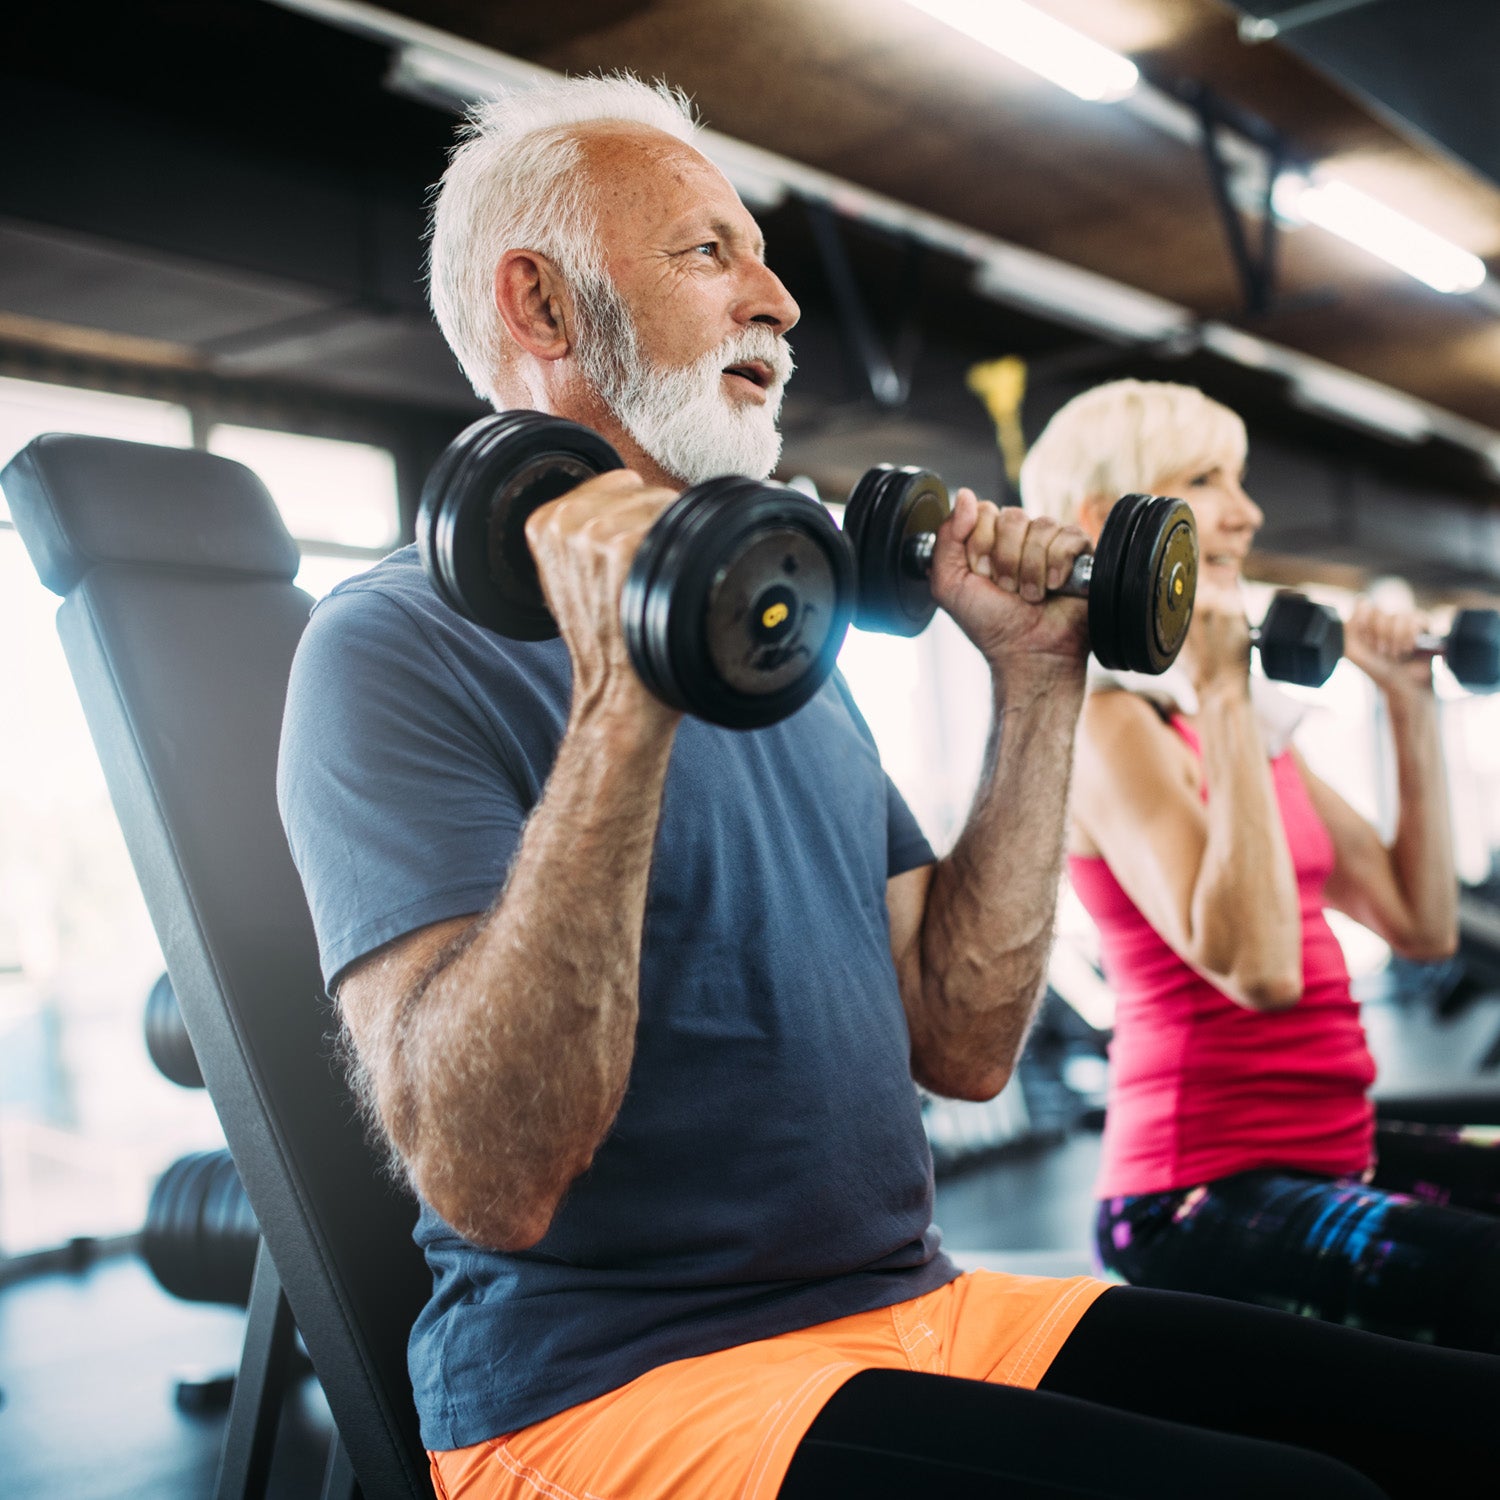 Exercise Boosts Cognitive Function In Older Adults, New Study